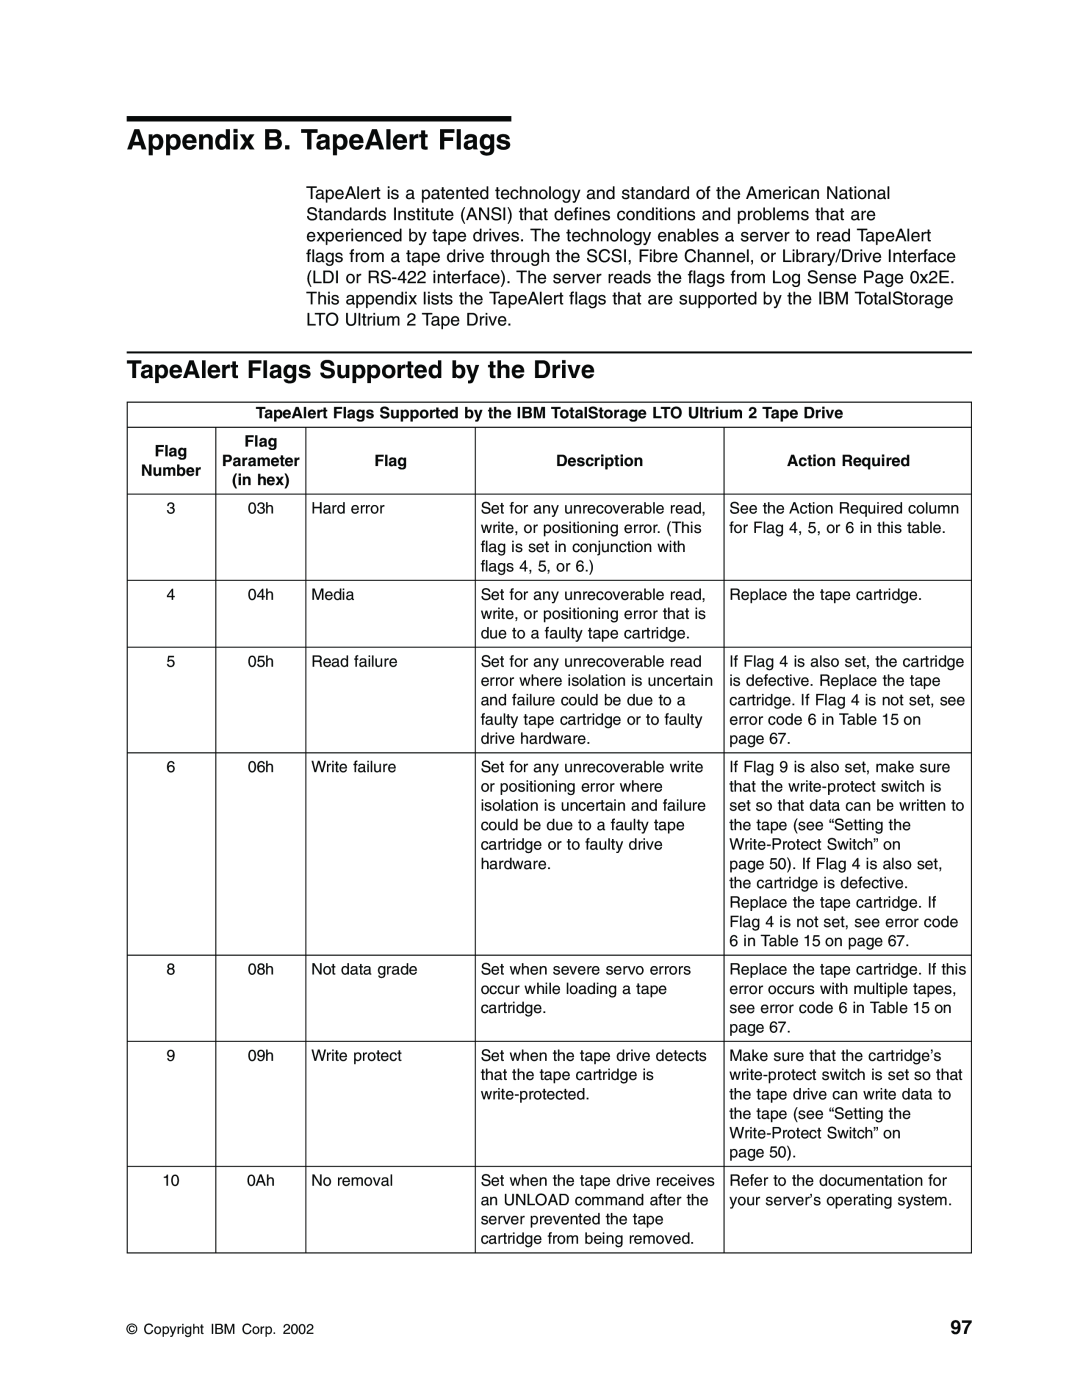 IBM T400F manual Appendix B. TapeAlert Flags, TapeAlert Flags Supported by the Drive, Description, Action Required, Number 